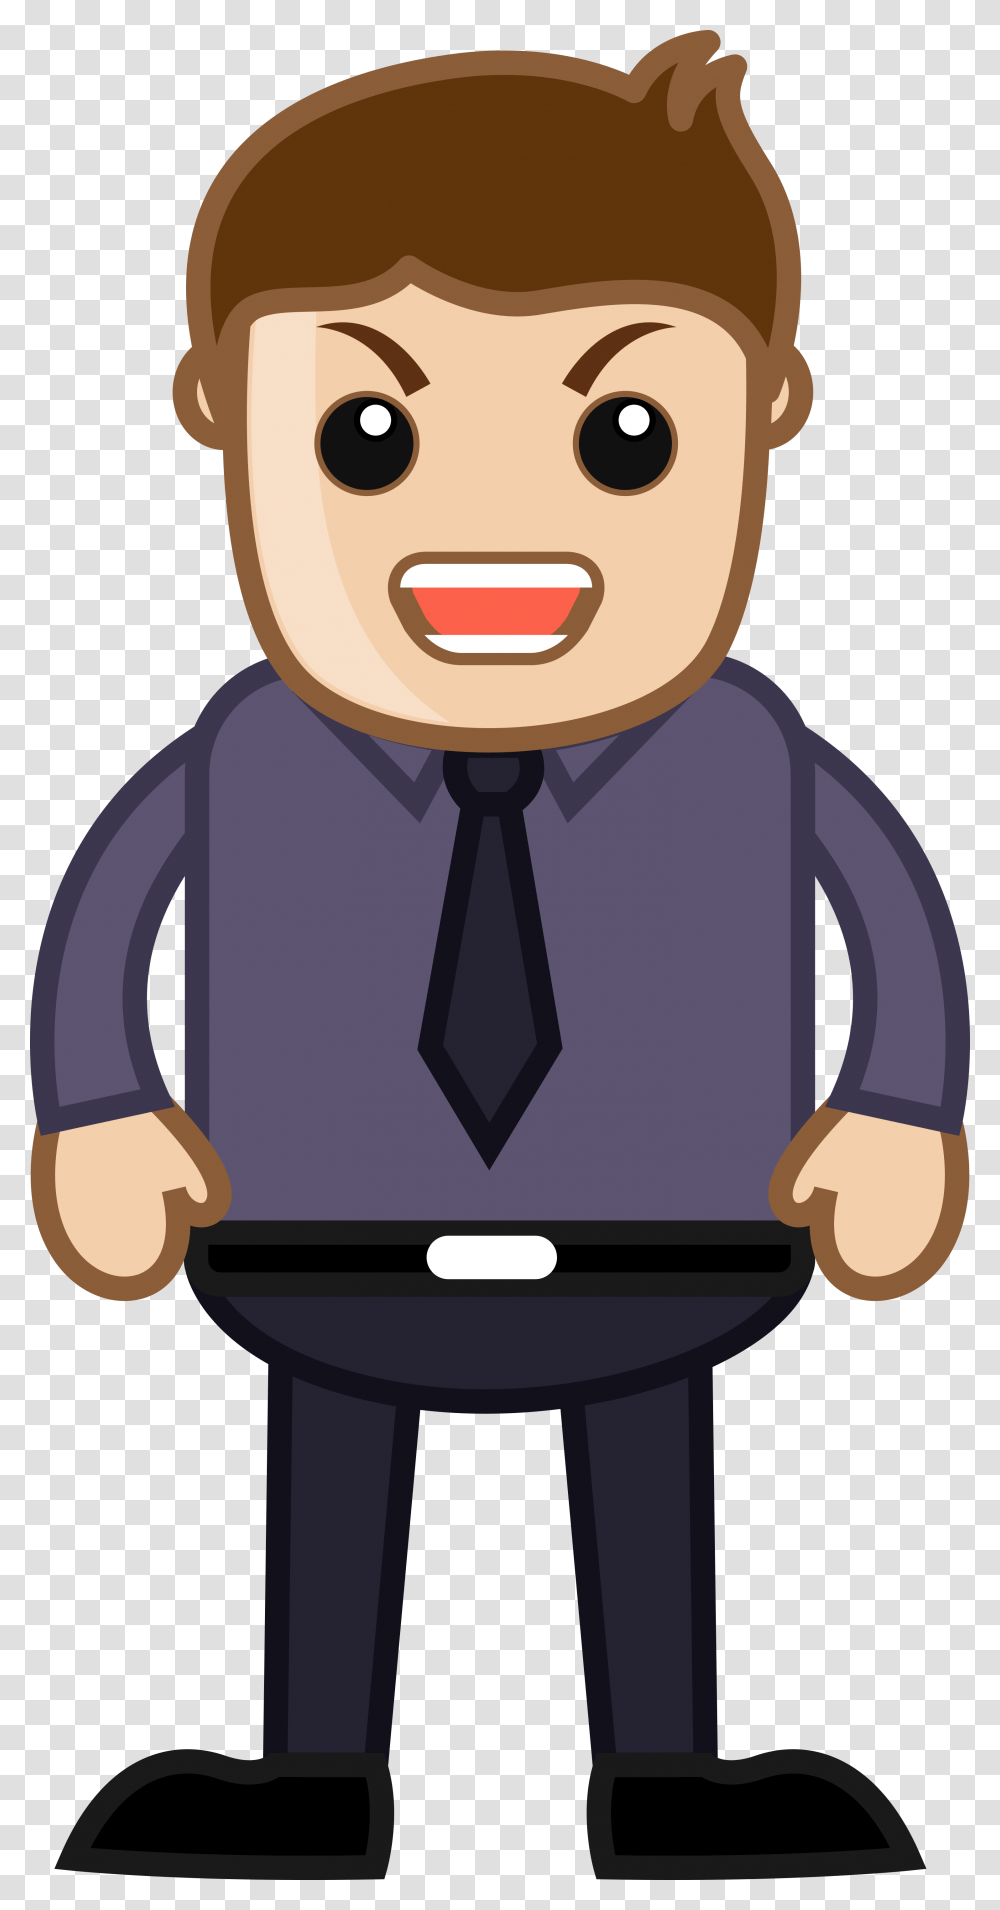 Angry Man Angry Man Office Corporate Cartoon People Angry Cartoon Person, Toy, Drawing, Doodle, Performer Transparent Png